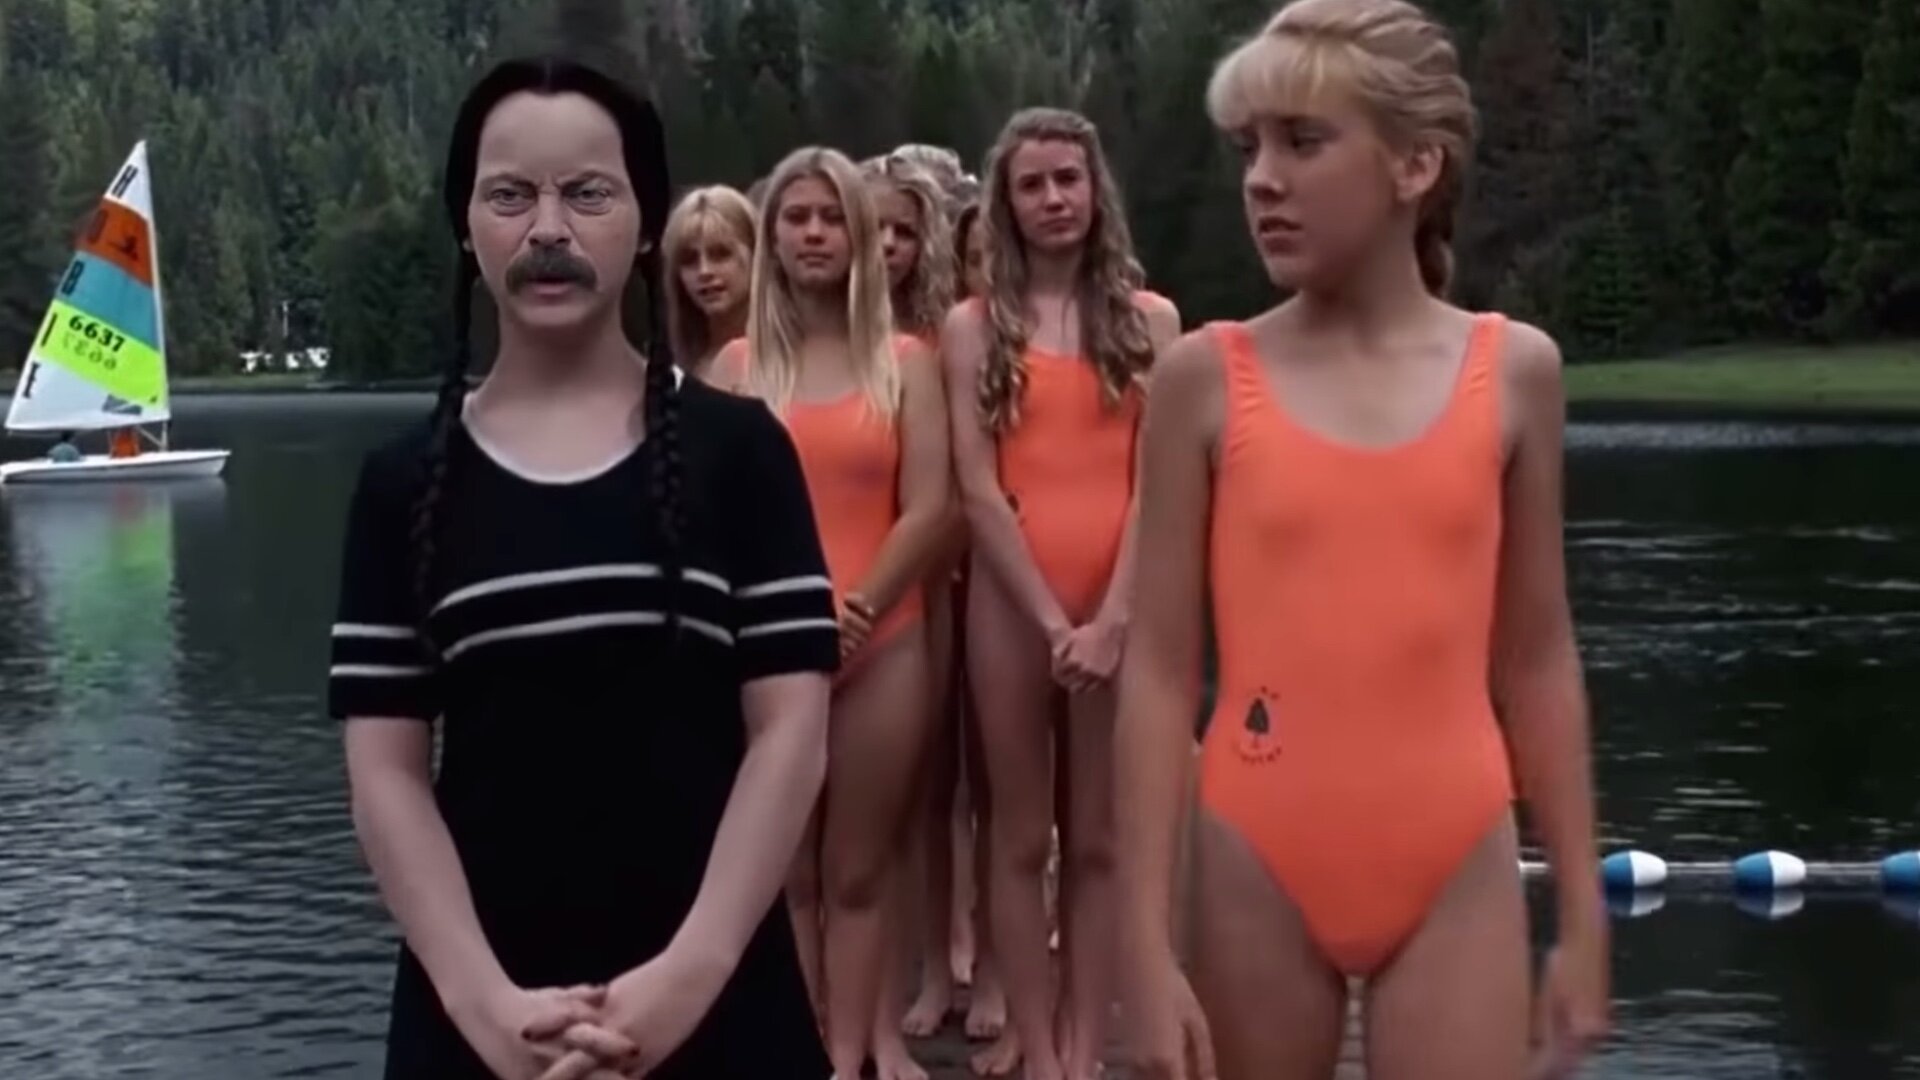 Addams family values swimsuit